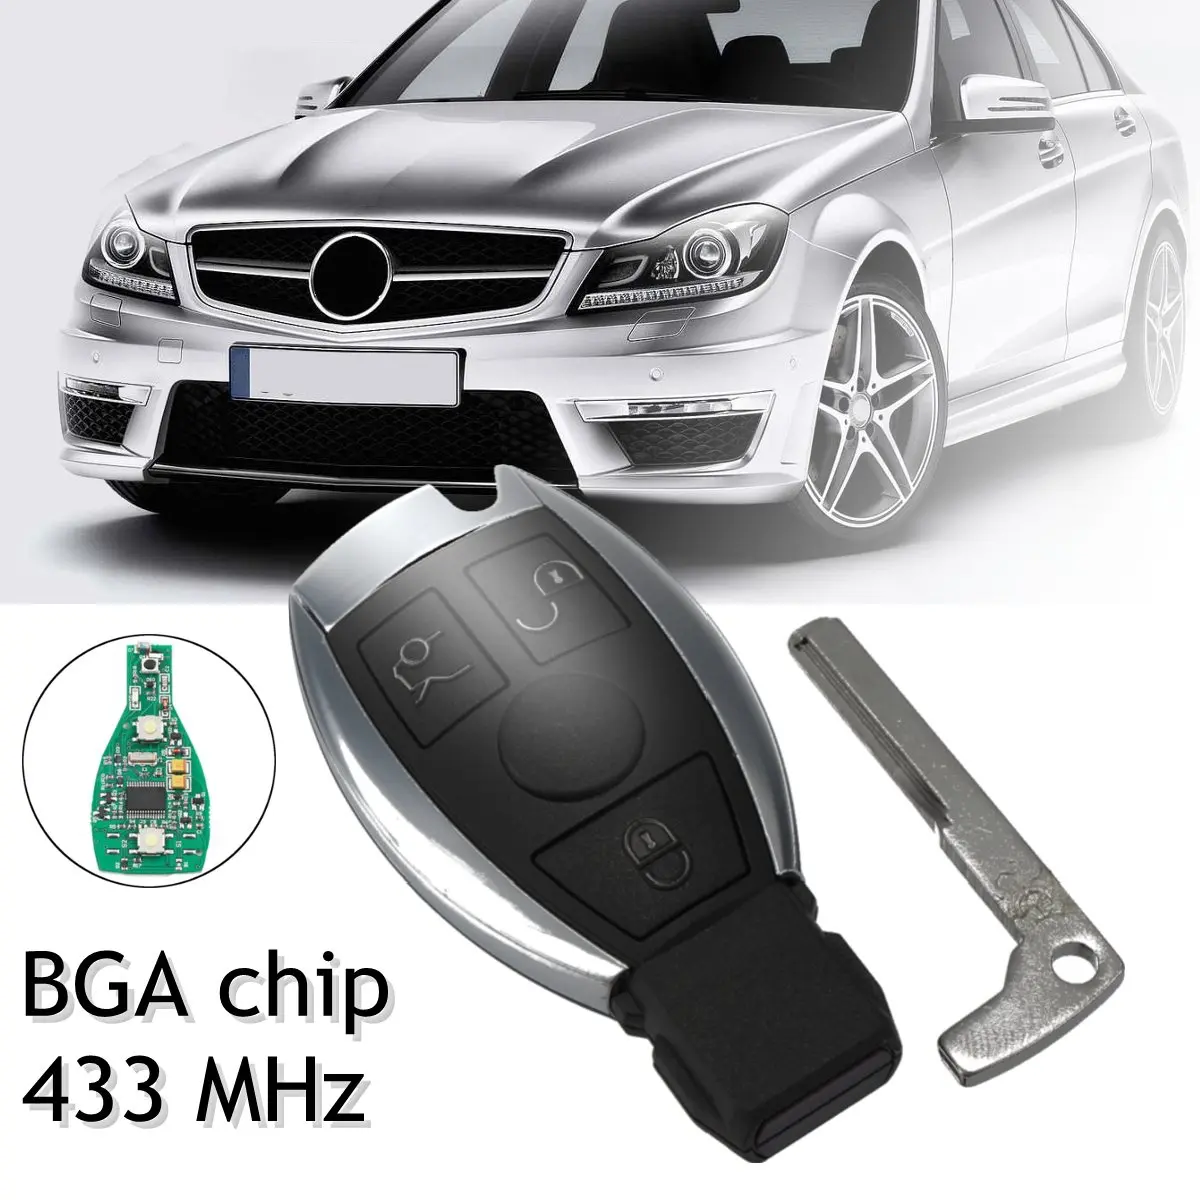 

433MHz 3 Buttons Remote Key Replacement Entry Fob Transmitter for Mercedes/Benz A E S G CLK SLK ML 2000+ w/ BGA Chip Uncut Blade